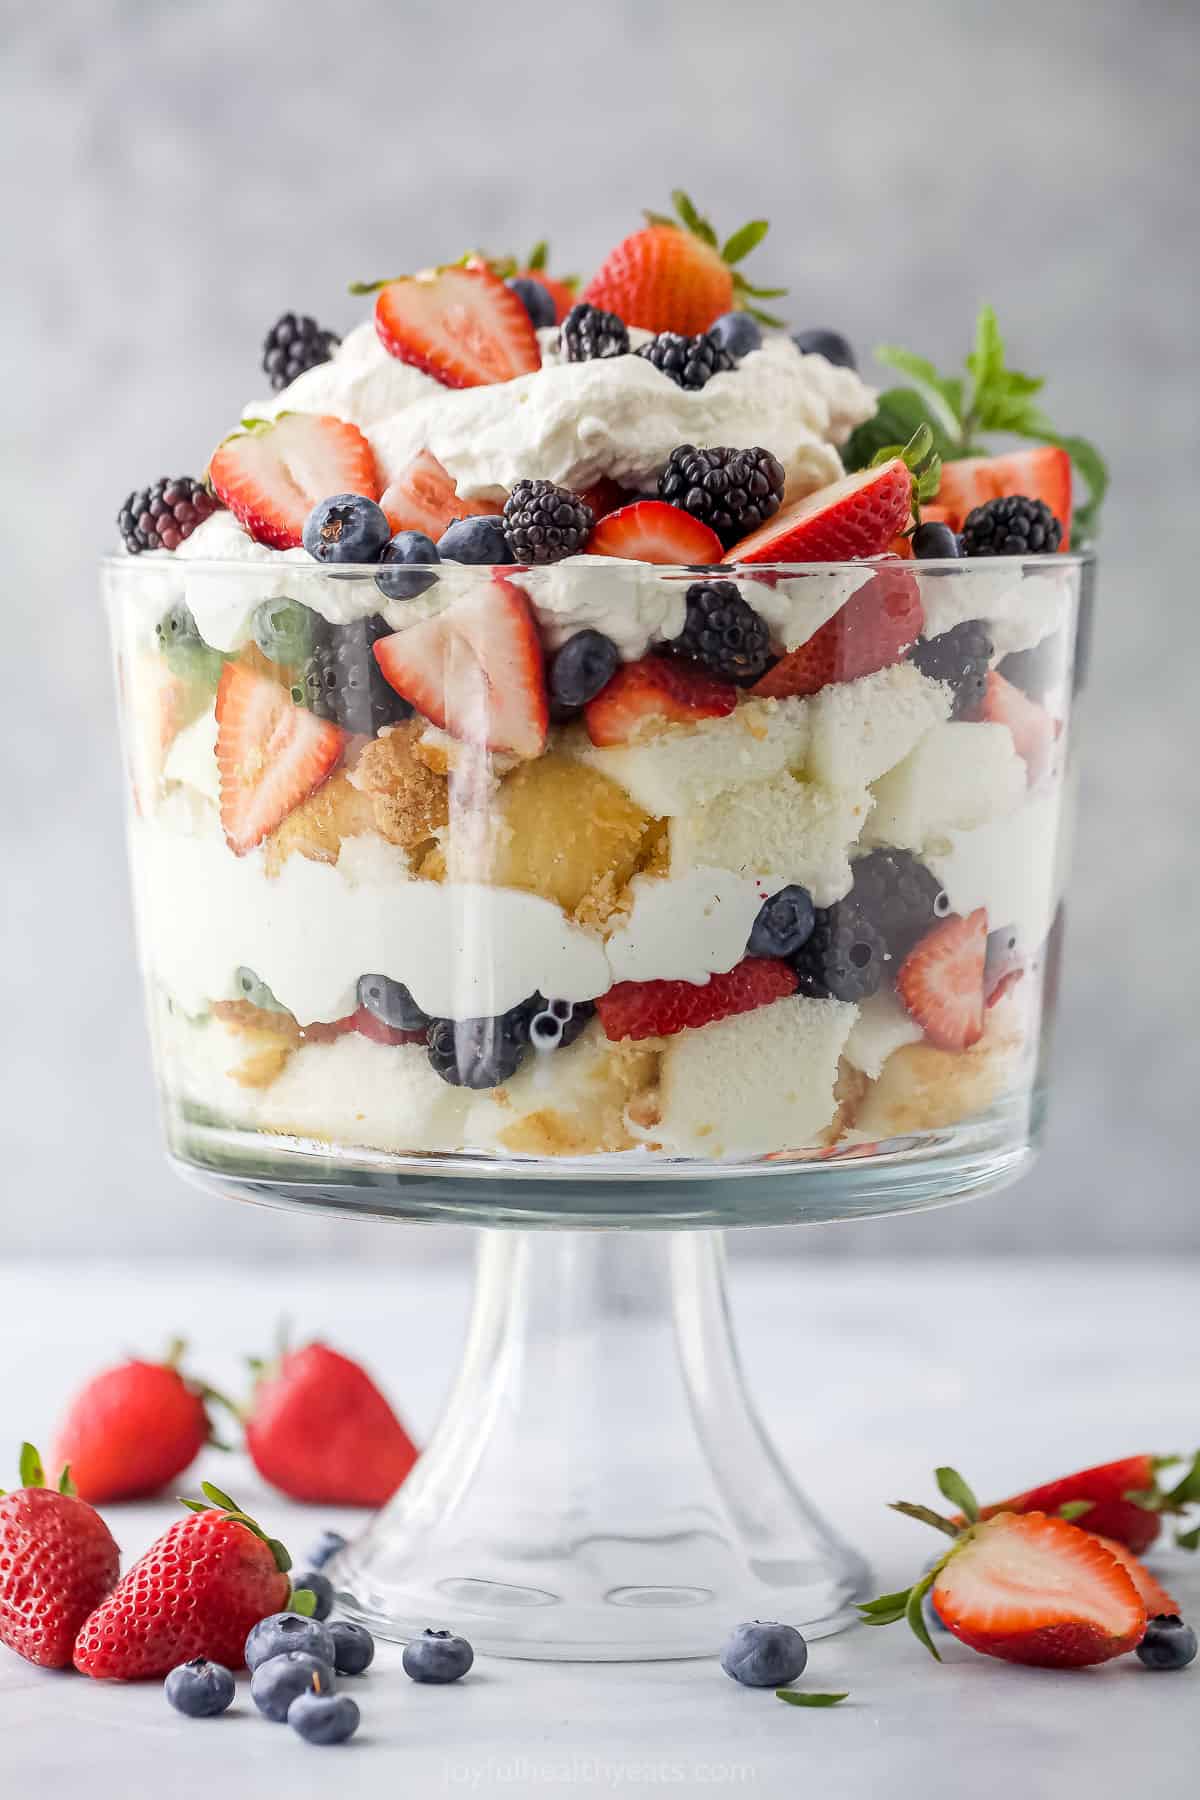 A layered dessert with fresh berries, angel food cake and whipped cream in a large glass container